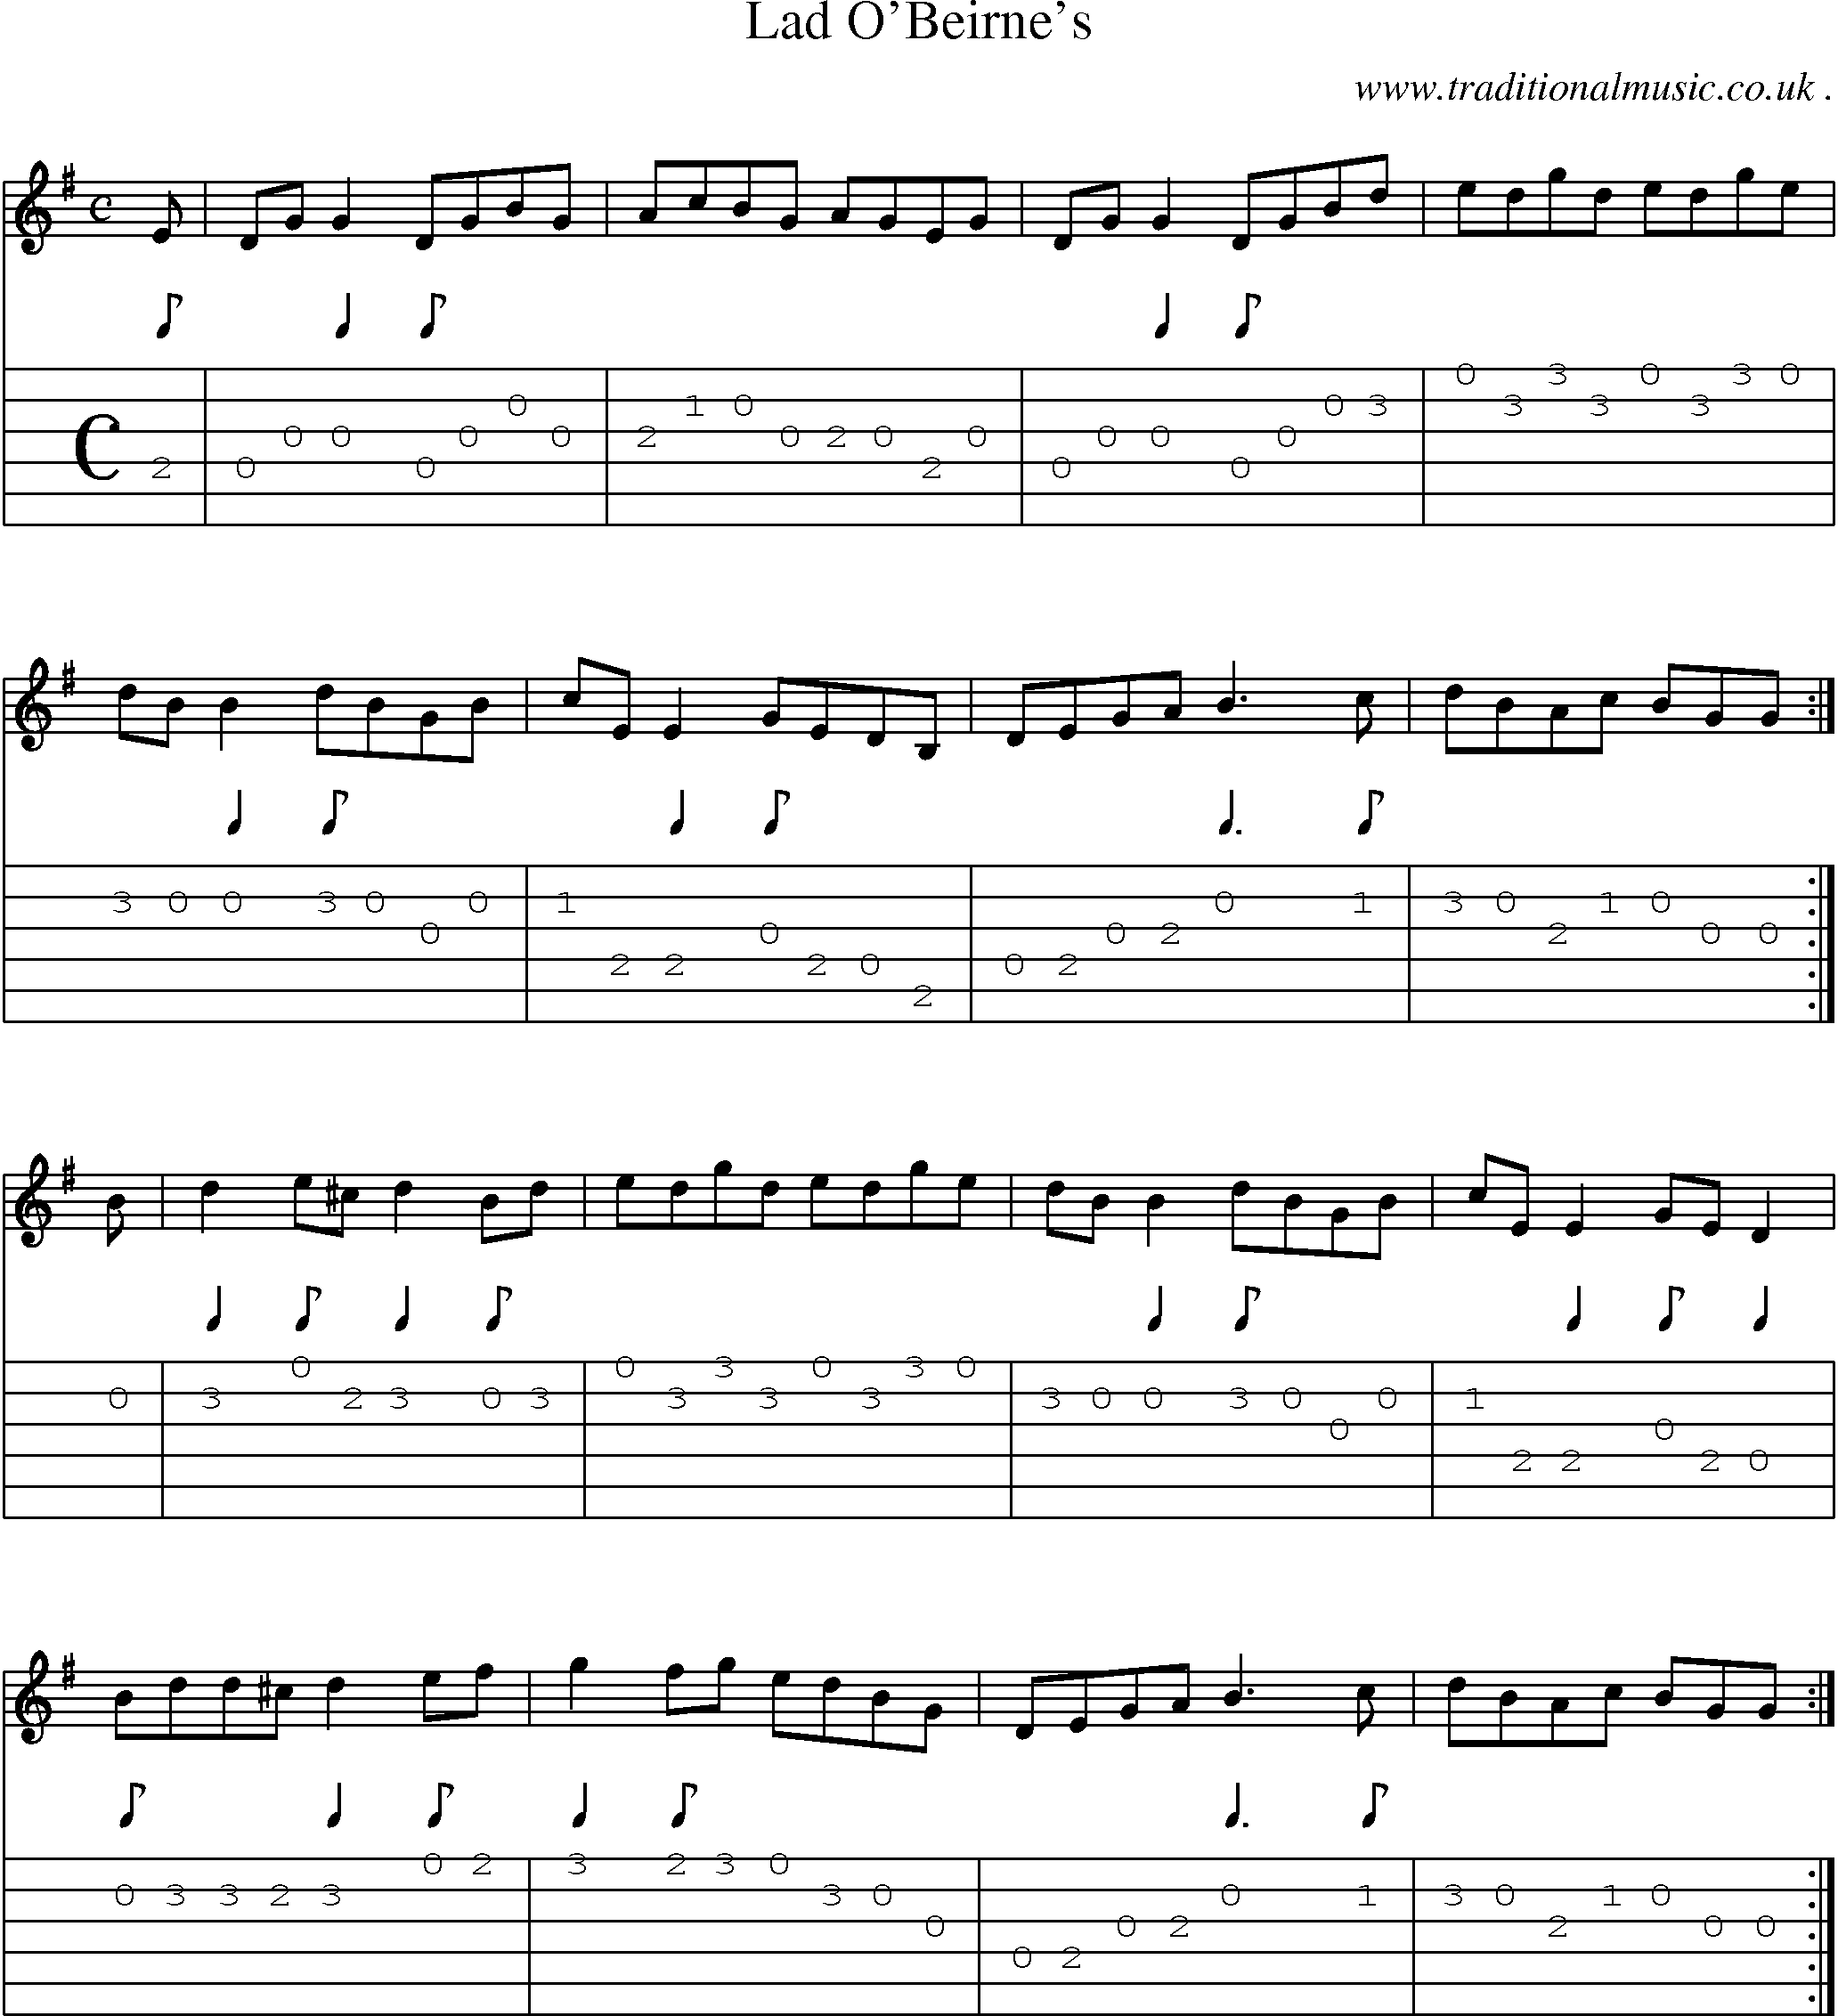 Sheet-Music and Guitar Tabs for Lad Obeirnes